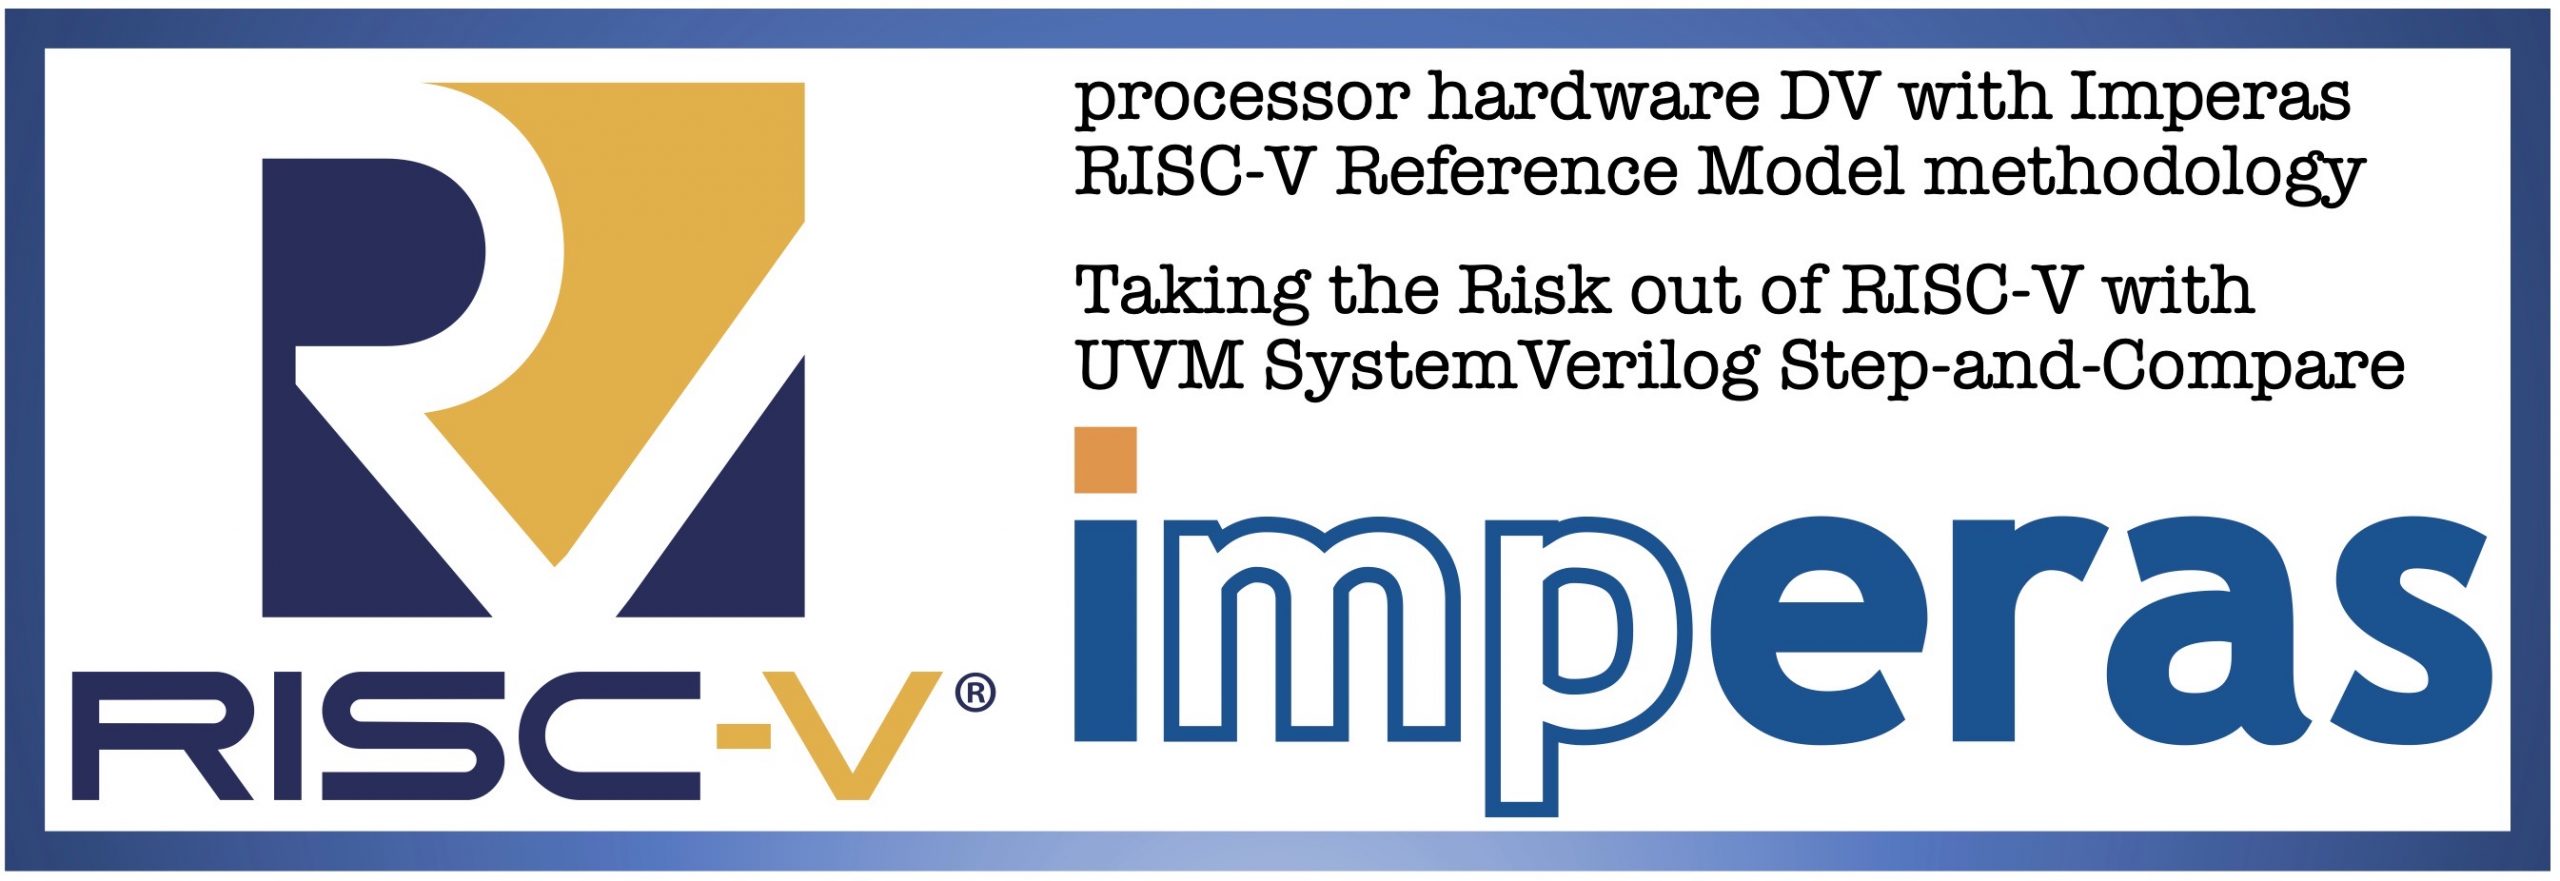 Silicon Labs selects Imperas RISC-V Reference Model for verification | Imperas